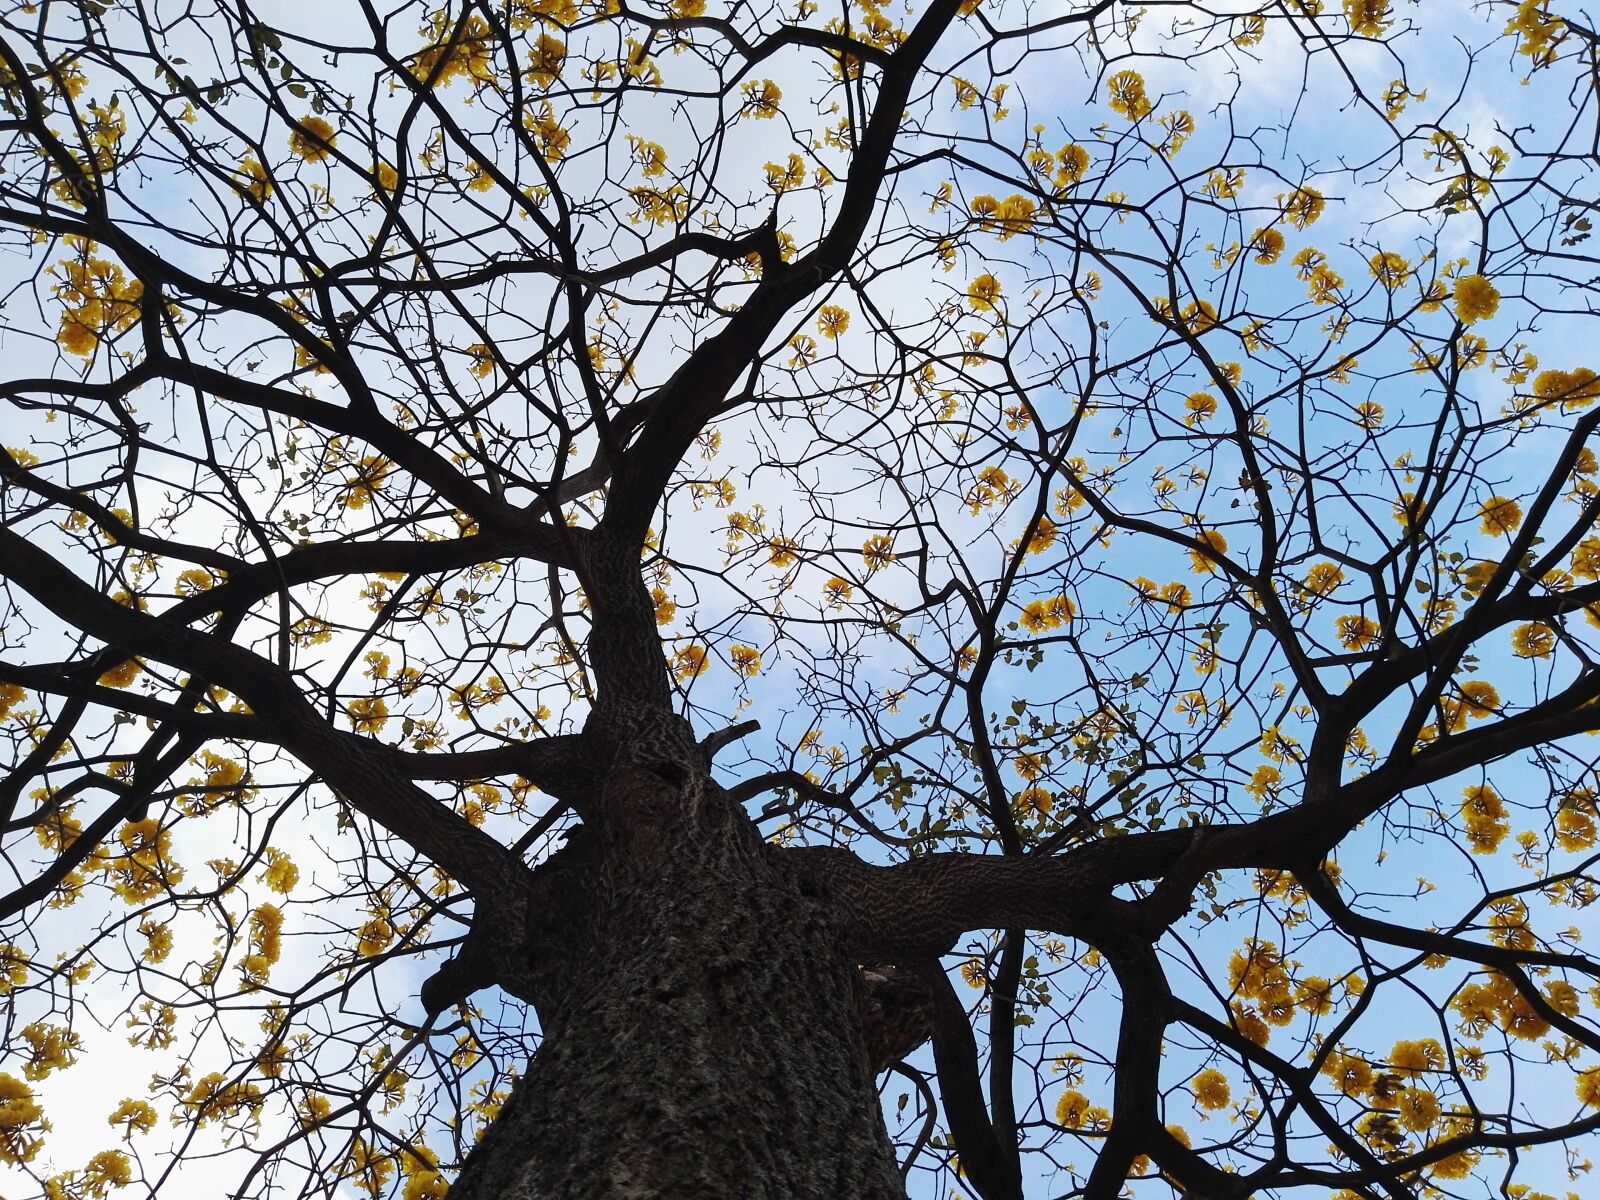 HUAWEI P8 sample photo. Tree, branches, nature photography